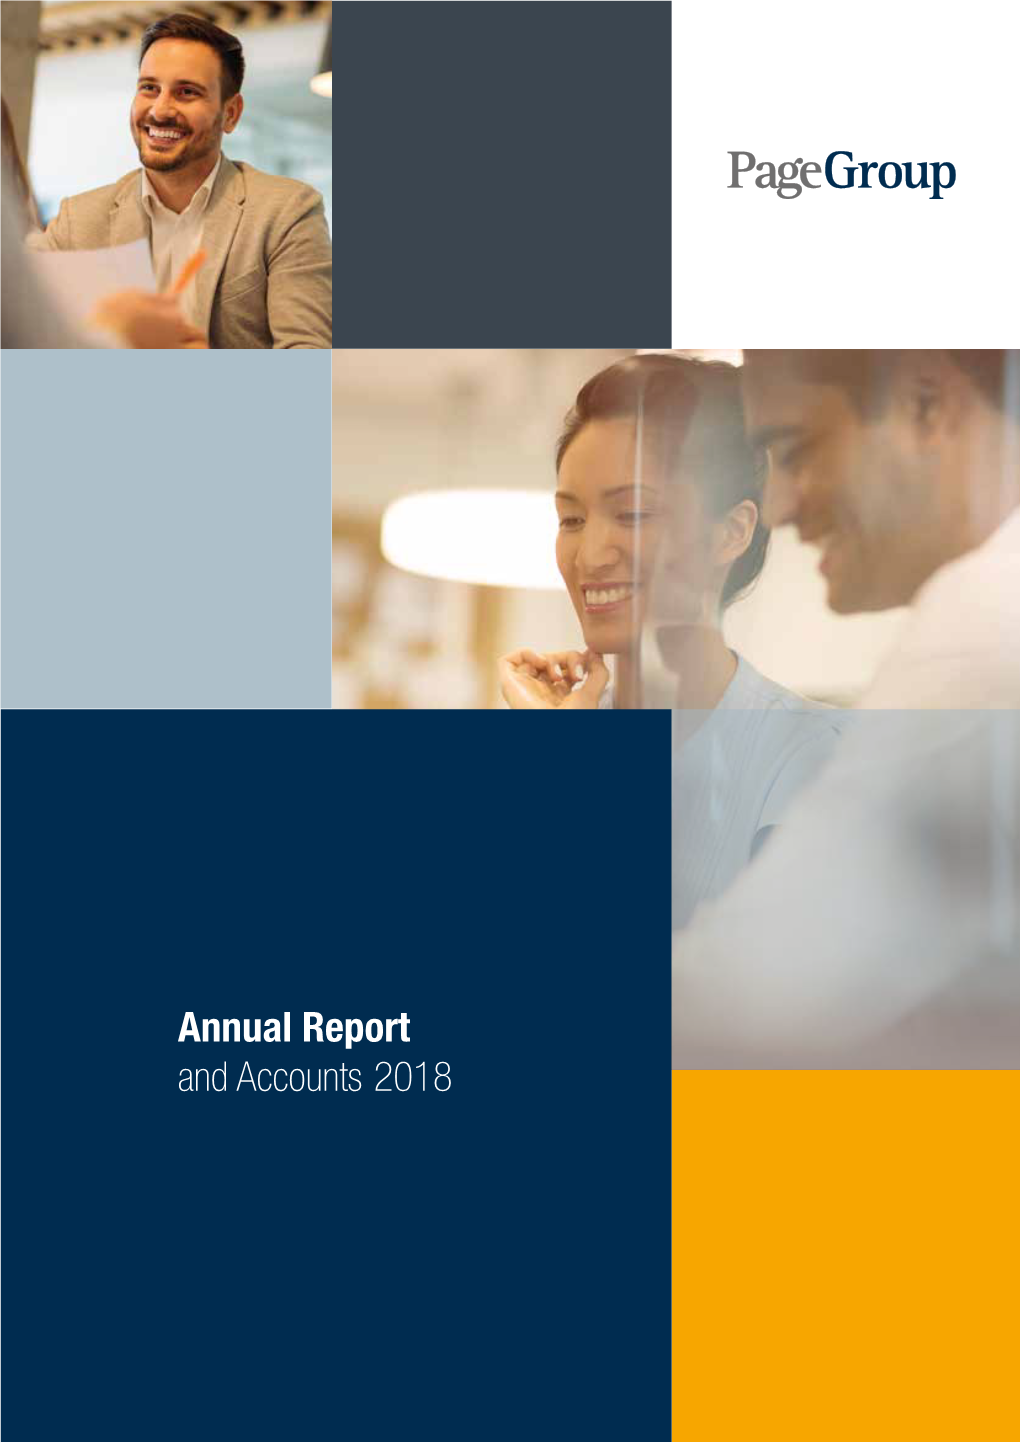 Annual Report and Accounts 2018